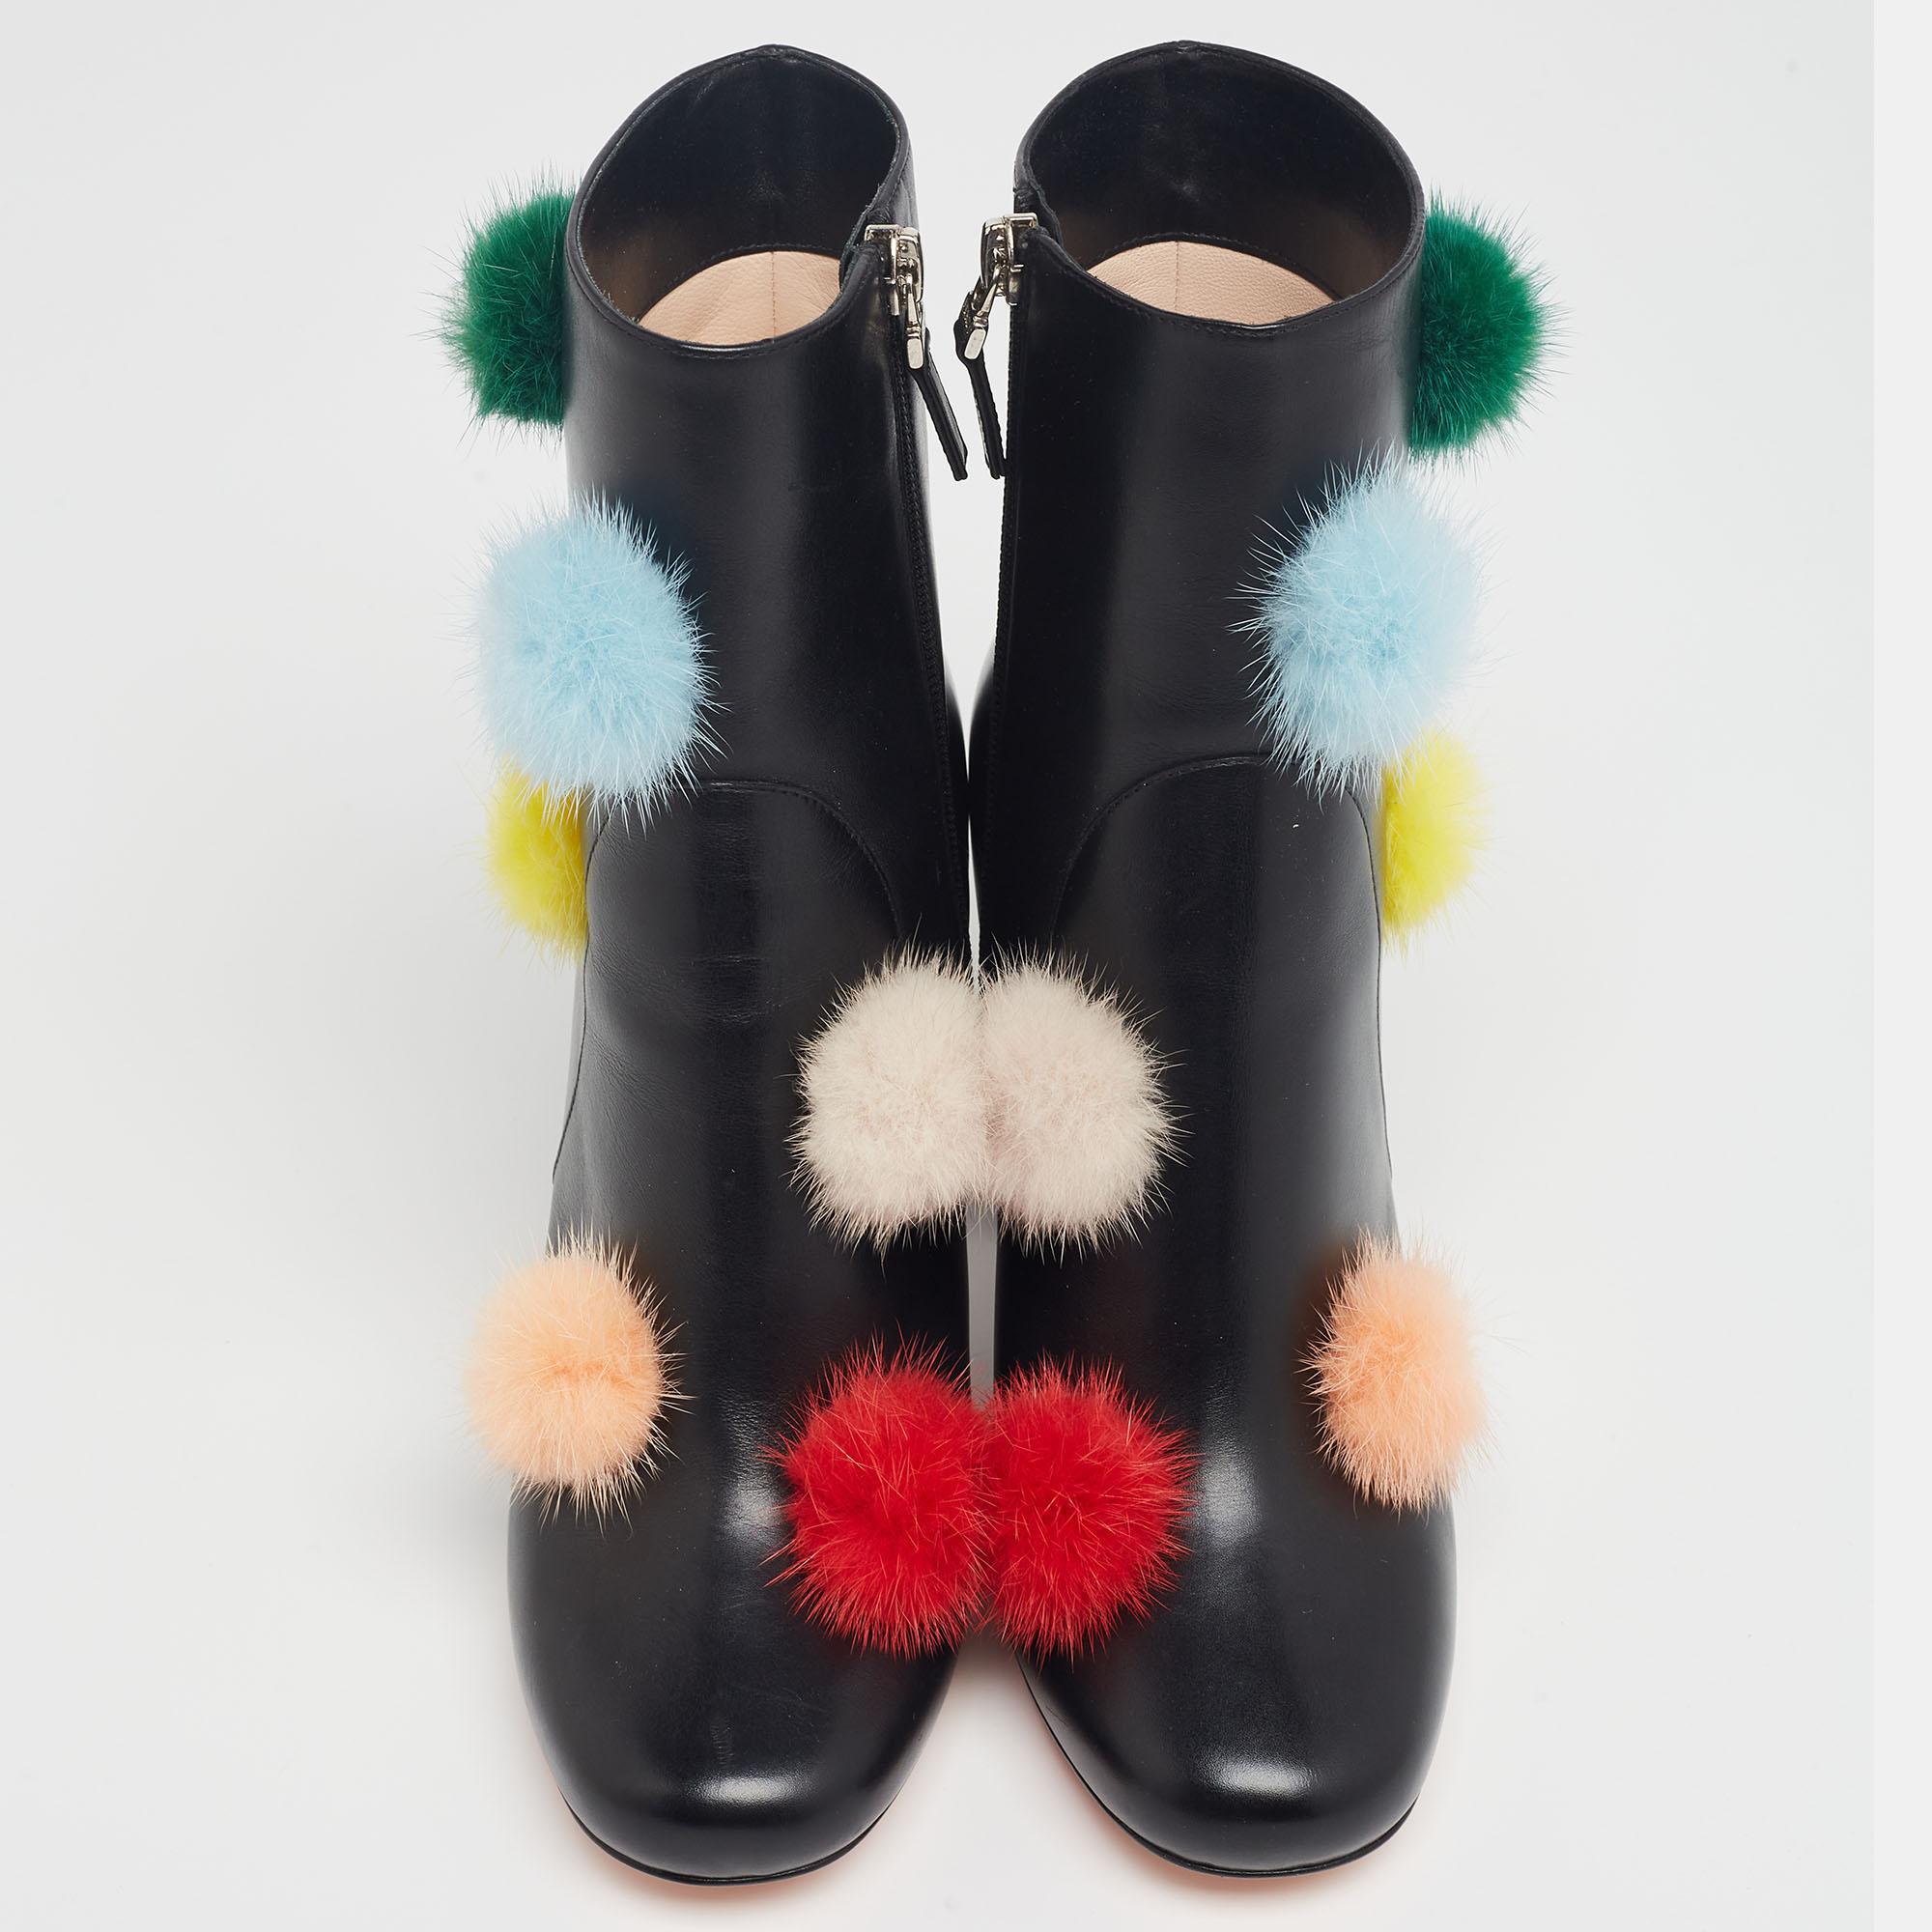 These stylish ankle booties from Fendi are absolute closet essentials. Crafted from quality leather in Italy, they come styled with rounded toes, playful pom-pom detailing, zip closures, and block heels. They are endowed with comfortable leather